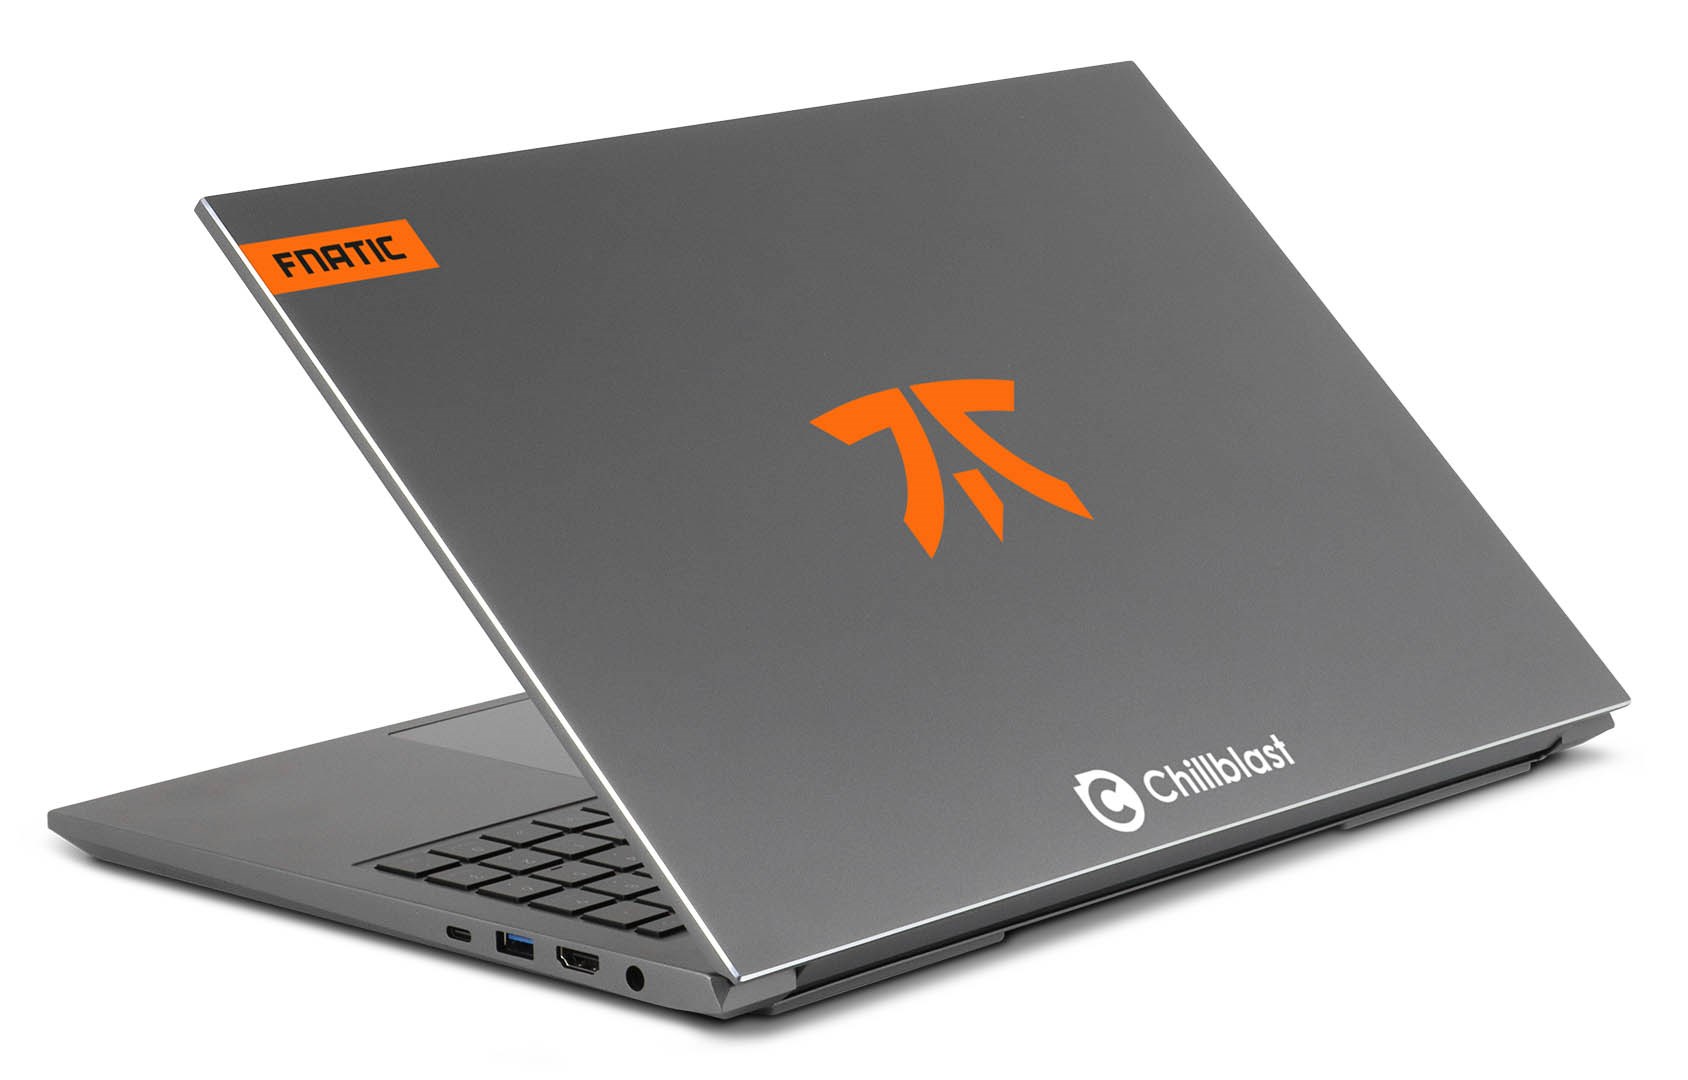 Chillblast FNATIC Flash Laptop viewed from the back, showing the FNATIC Logo.